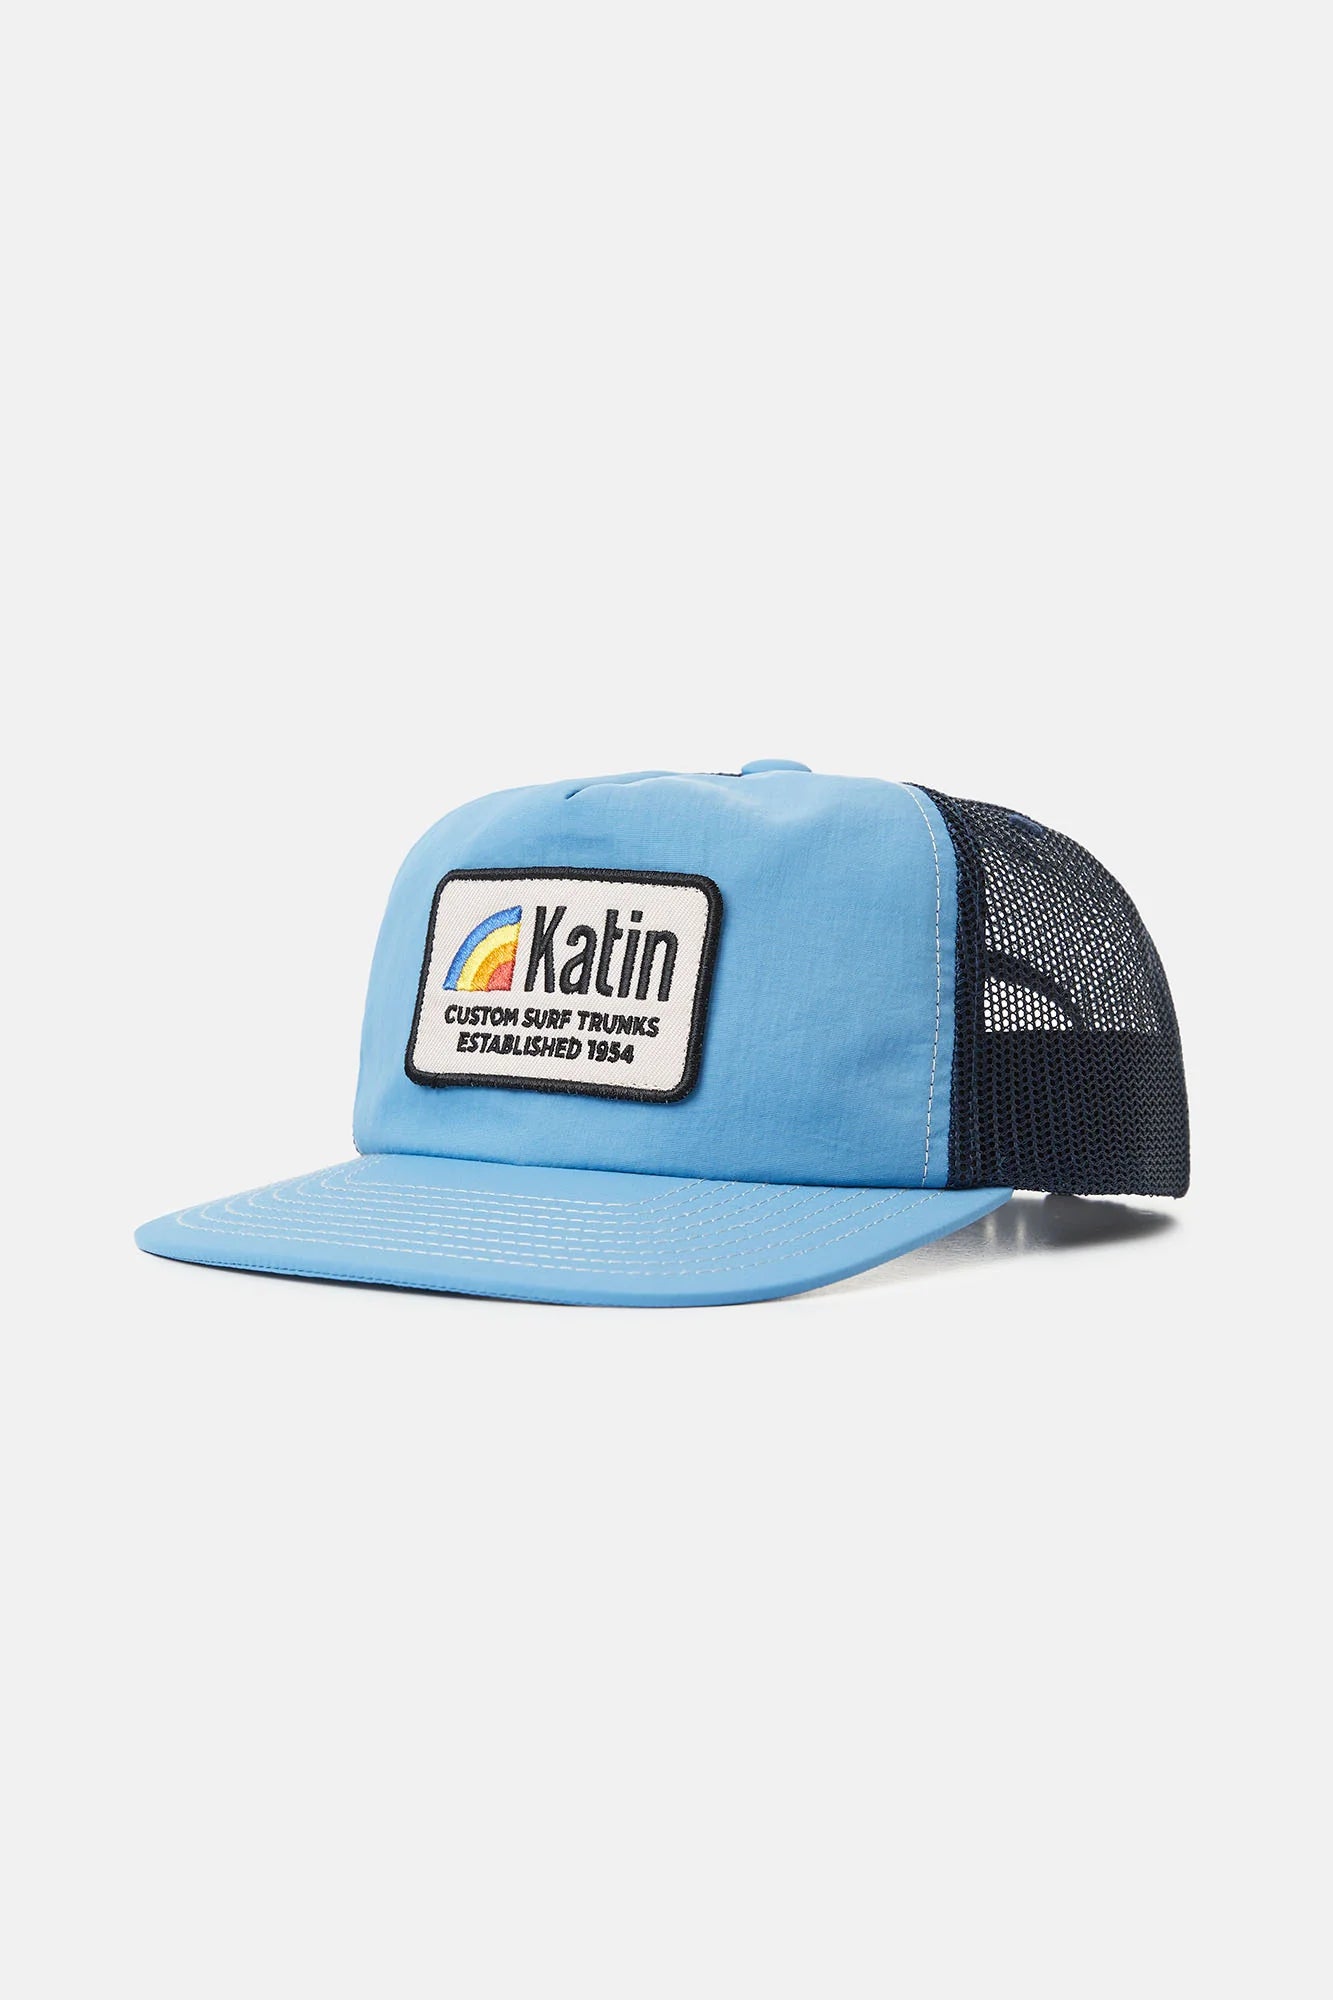 Katin Country Trucker Hat